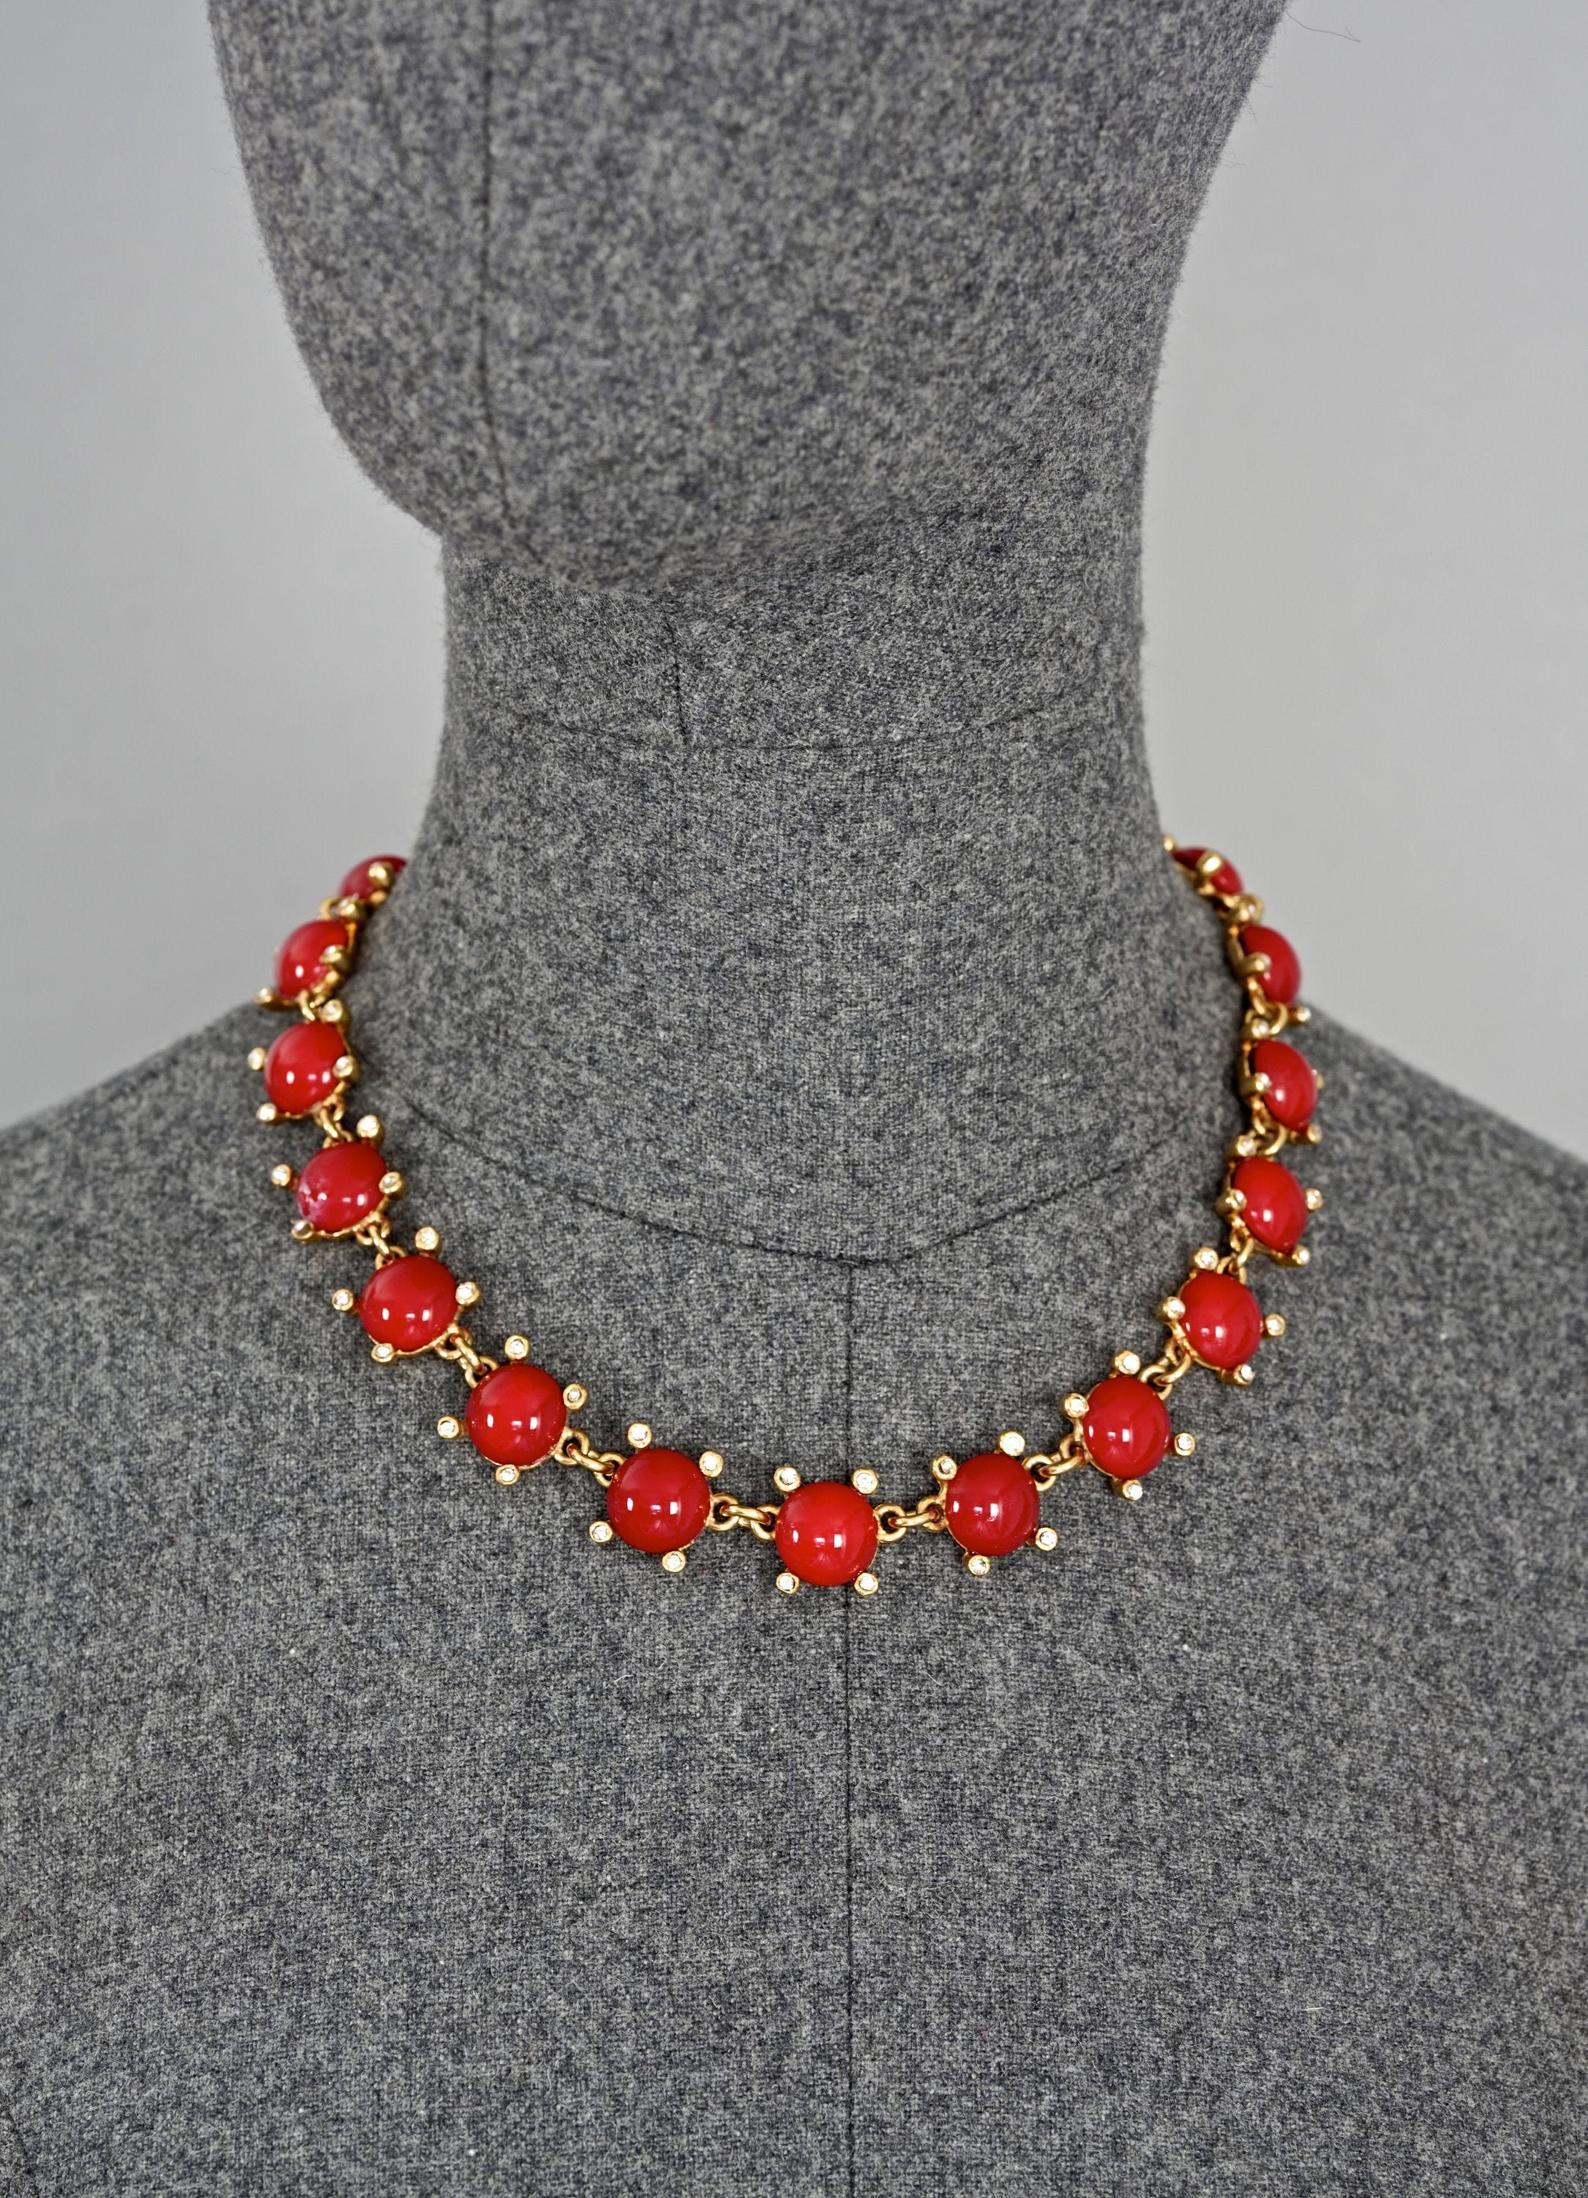 Vintage YVES SAINT LAURENT Ysl Red Glass Cabochon Rhinestone Necklace

Measurements:
Height: 0.67 inch (1.7 cm)
Wearable Length: 18.11 inches (46 cm)

Features:
- 100% Authentic YVES SAINT LAURENT.
- Red glass cabochon links.
- Clear rhinestone